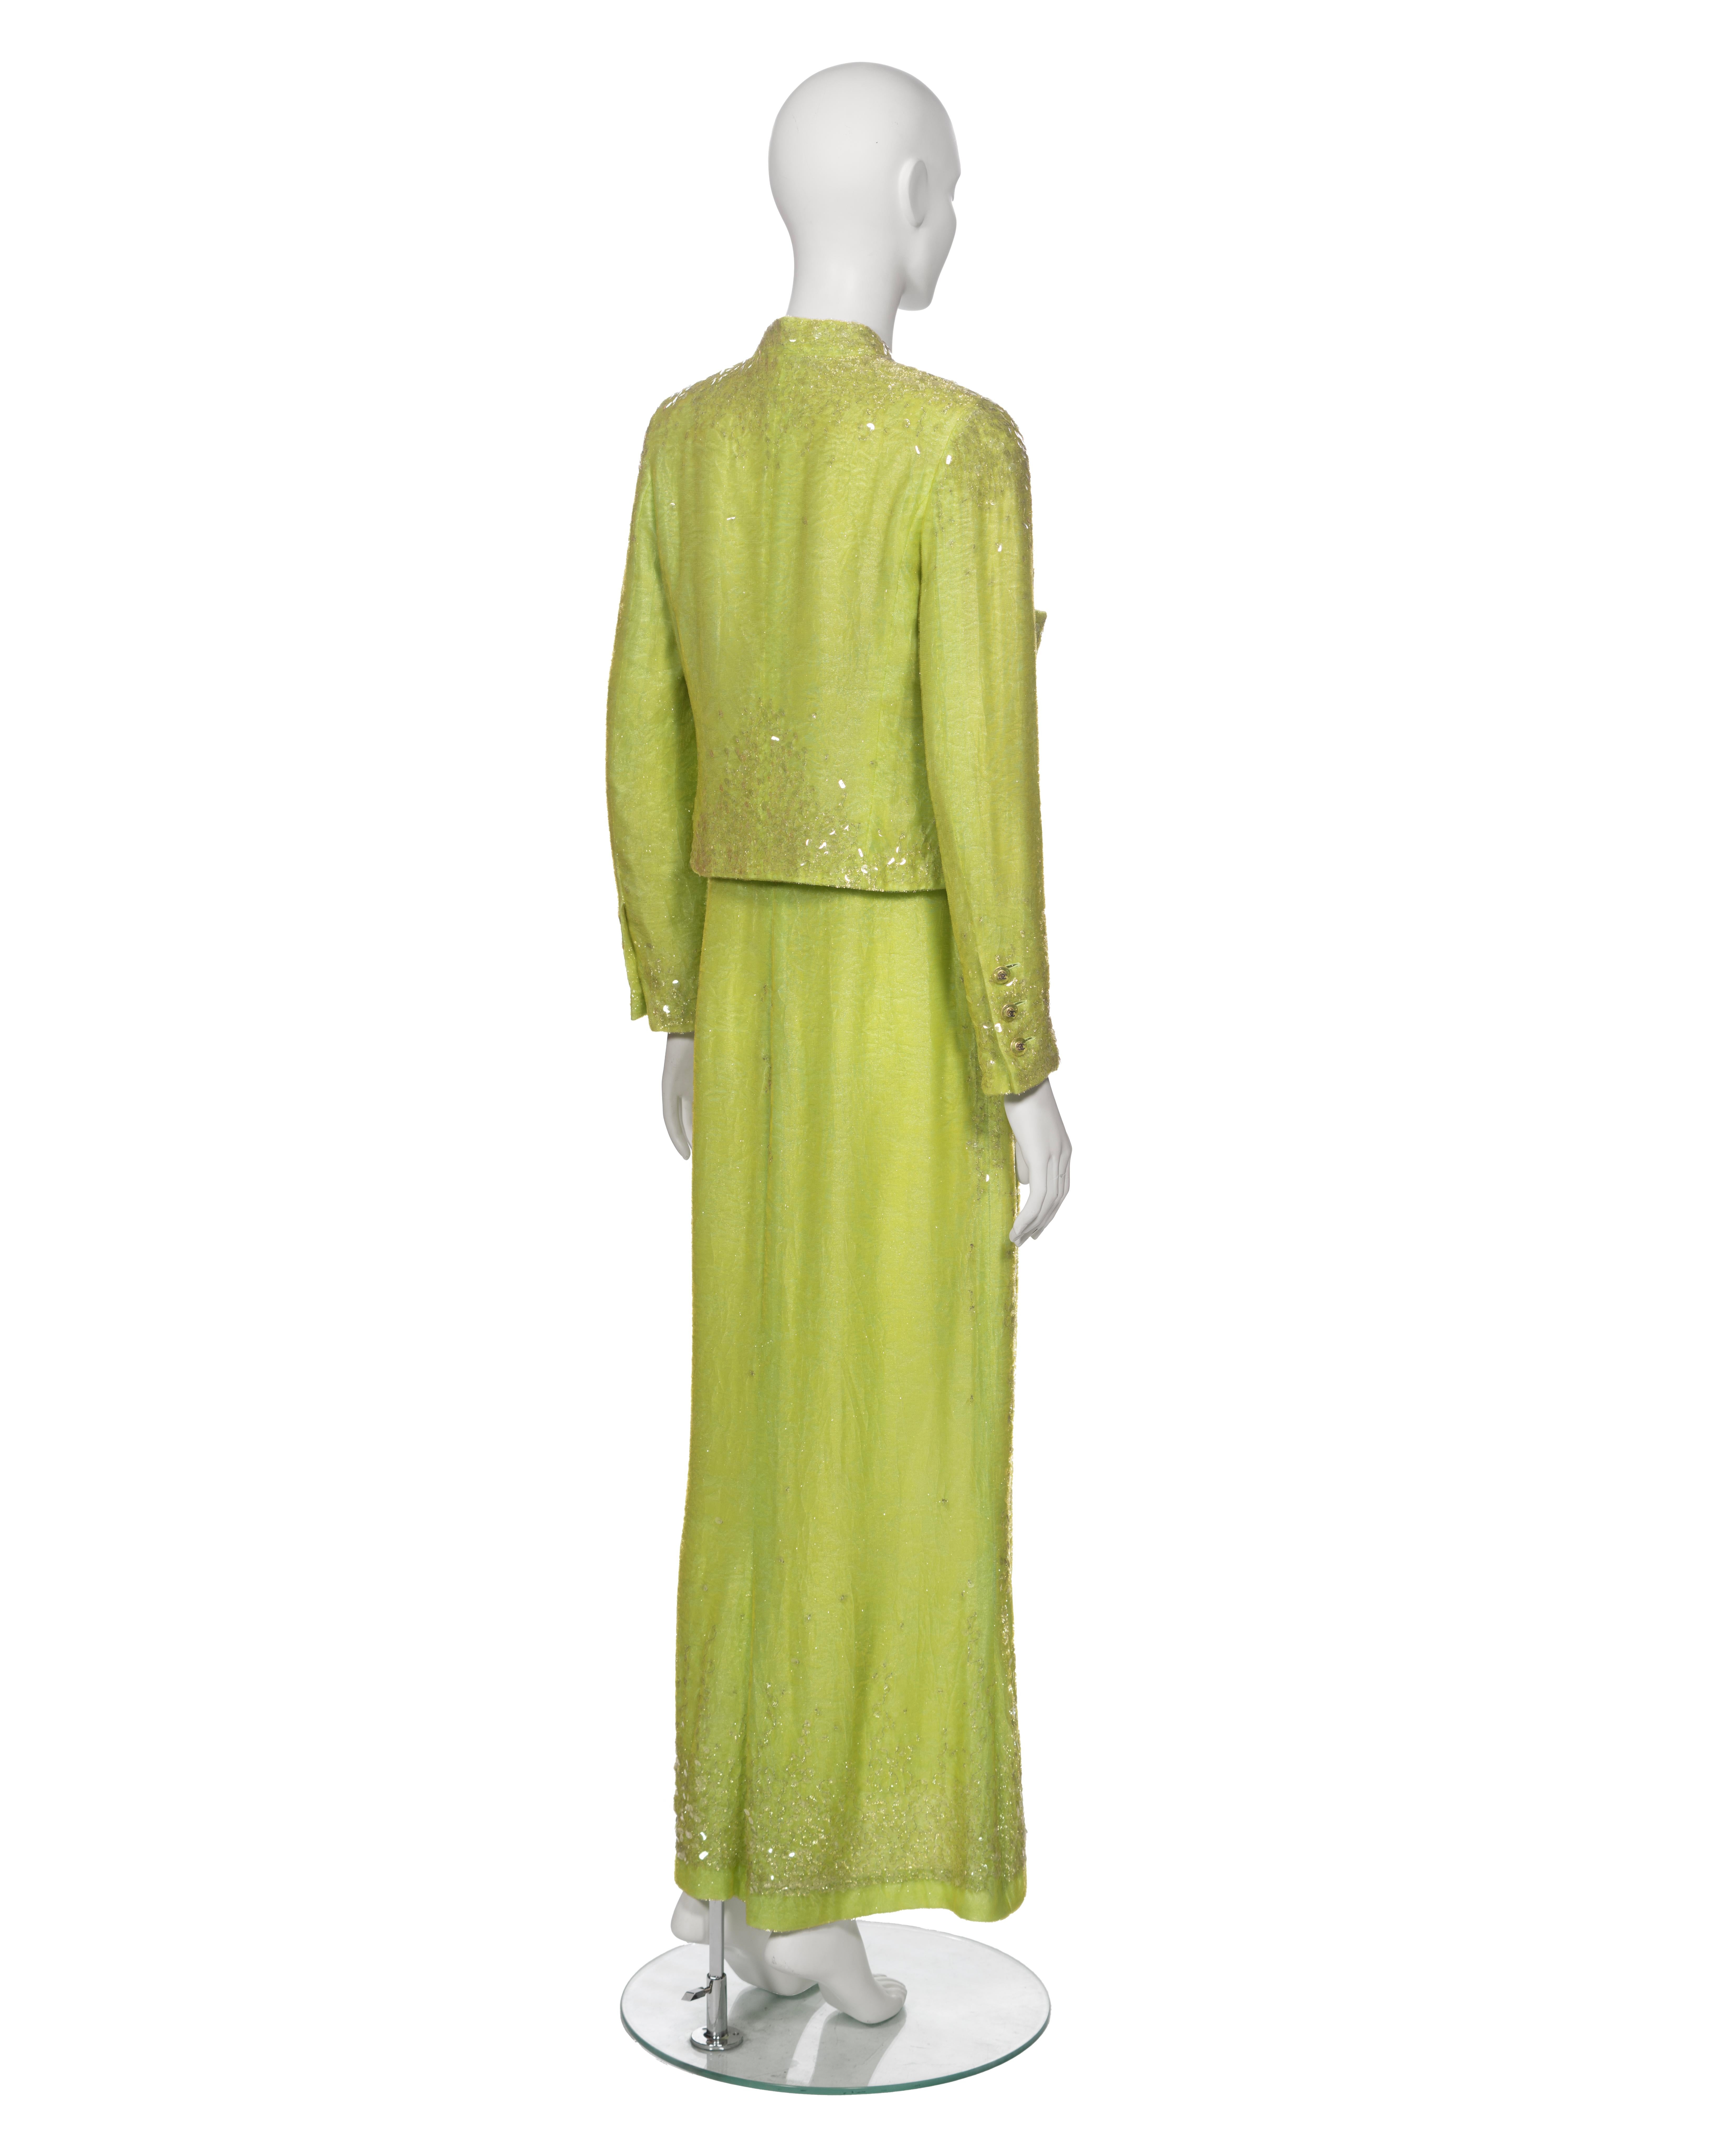 Chanel by Karl Lagerfeld Embellished Lime Green Velvet Dress and Jacket, ss 1997 For Sale 9